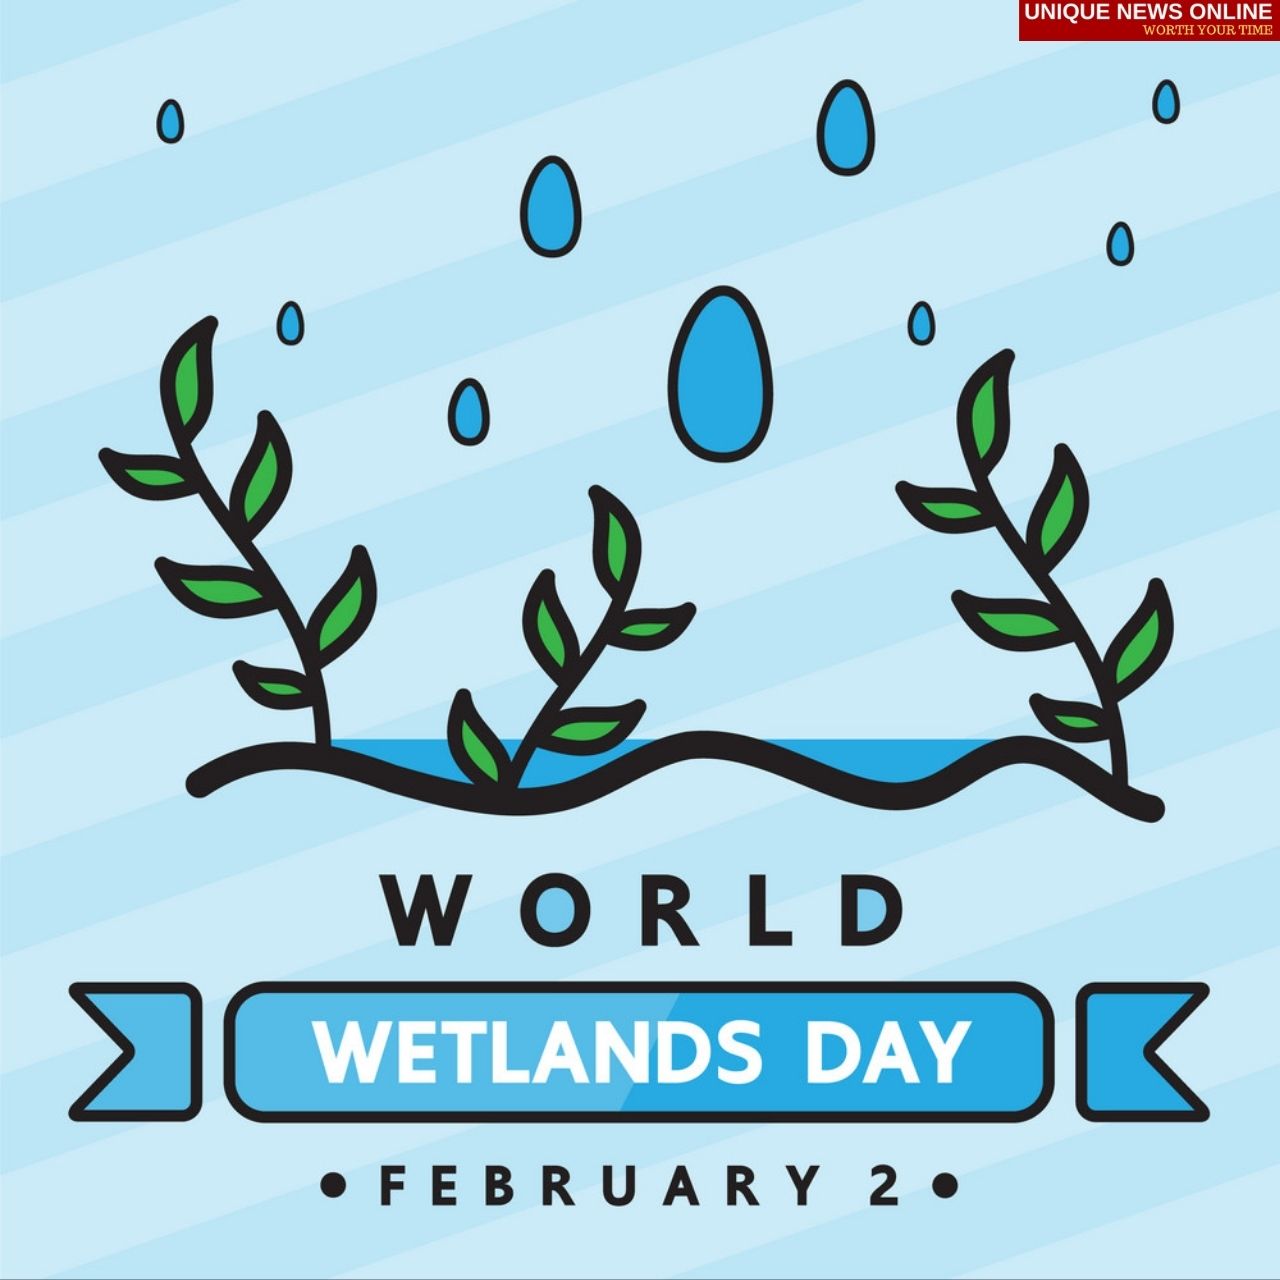 World Wetlands Day 2022 Quotes, Messages, HD Images, Posters, Slogans to create awareness